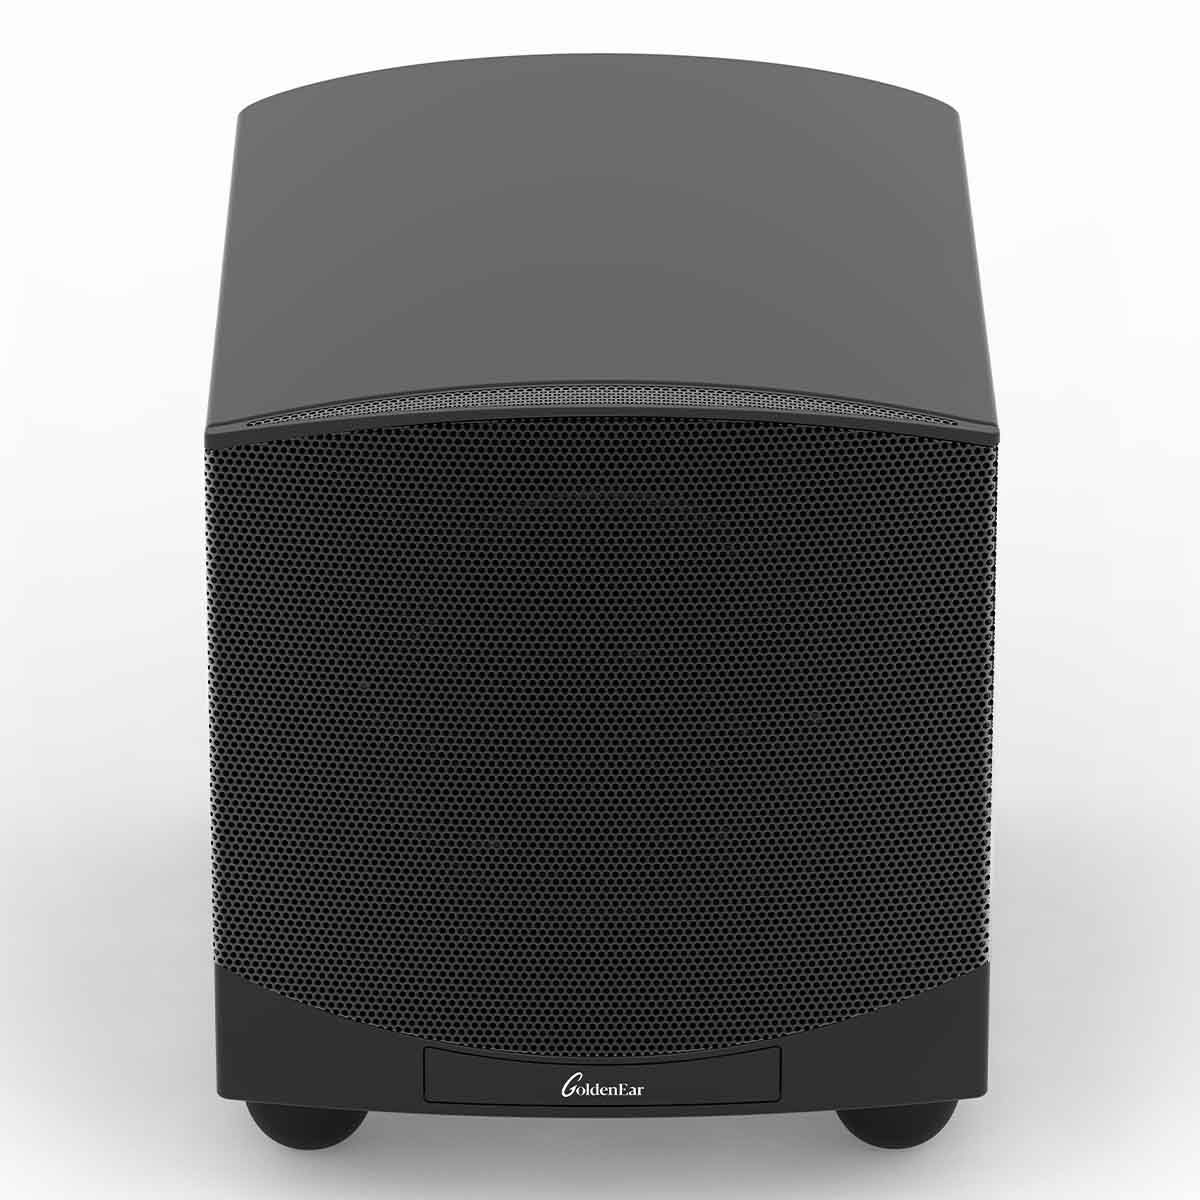 GoldenEar ForceField 30 - 8” Compact Subwoofer - Black - front view